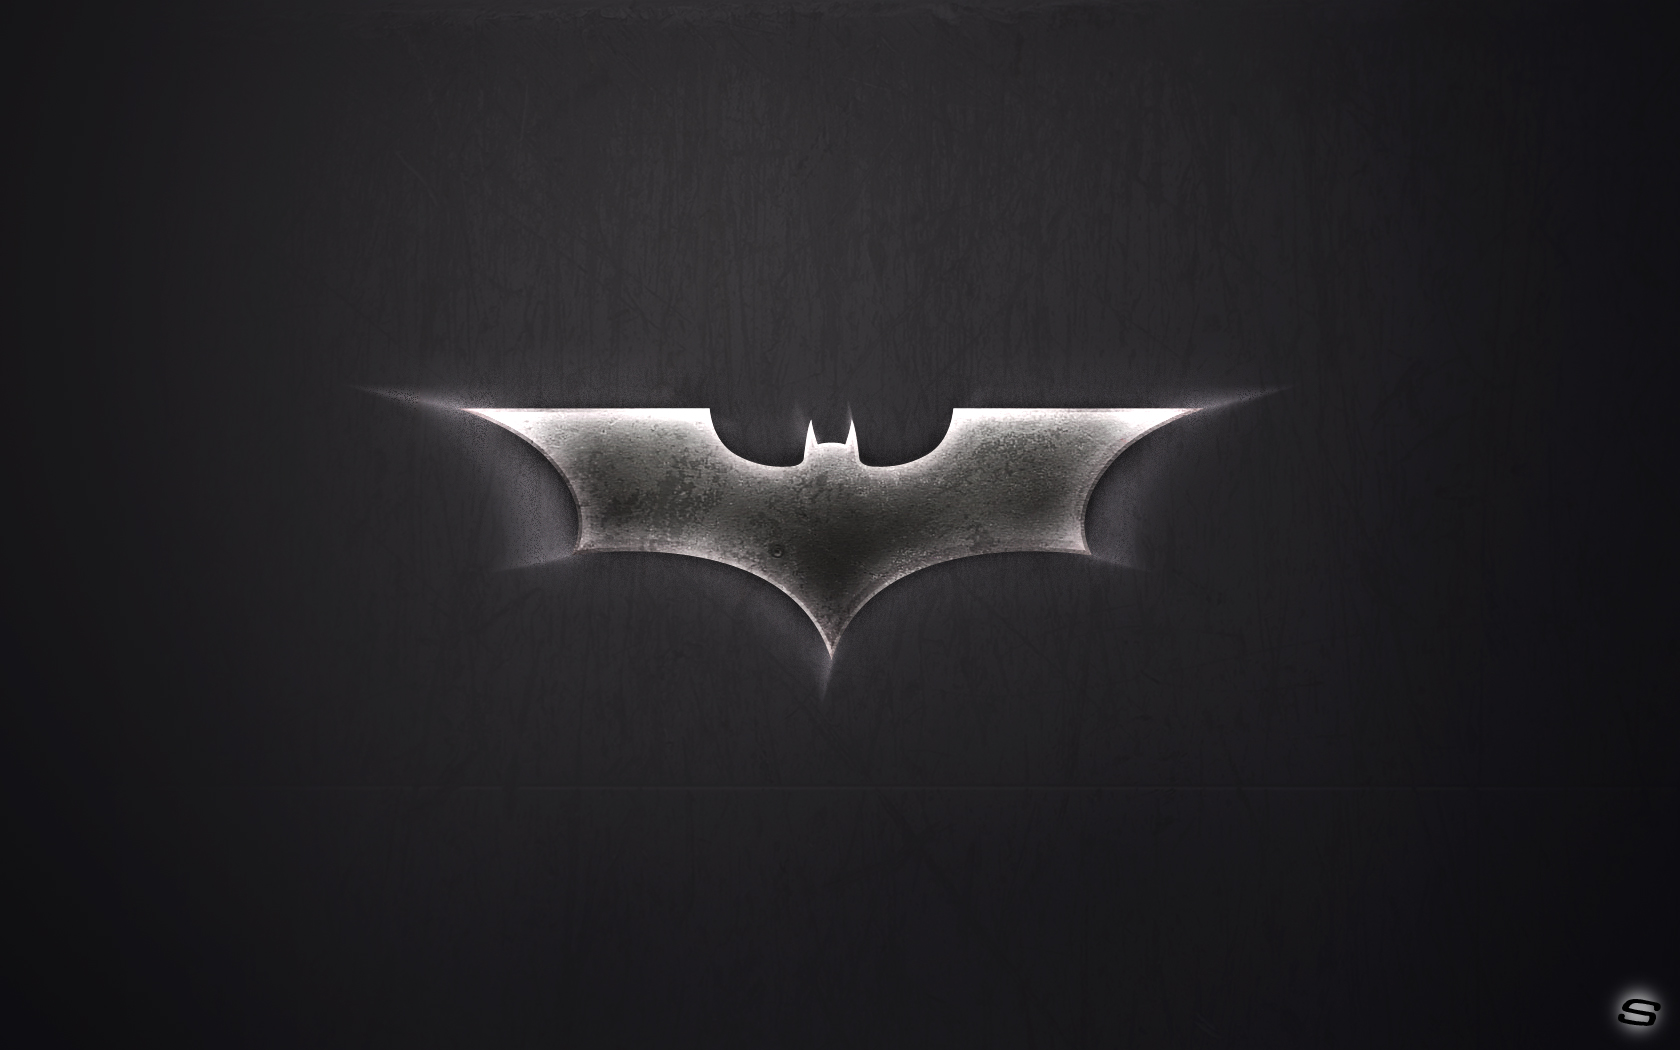 BATMAN LOGO wallpapers are presented on the website Wallpaper